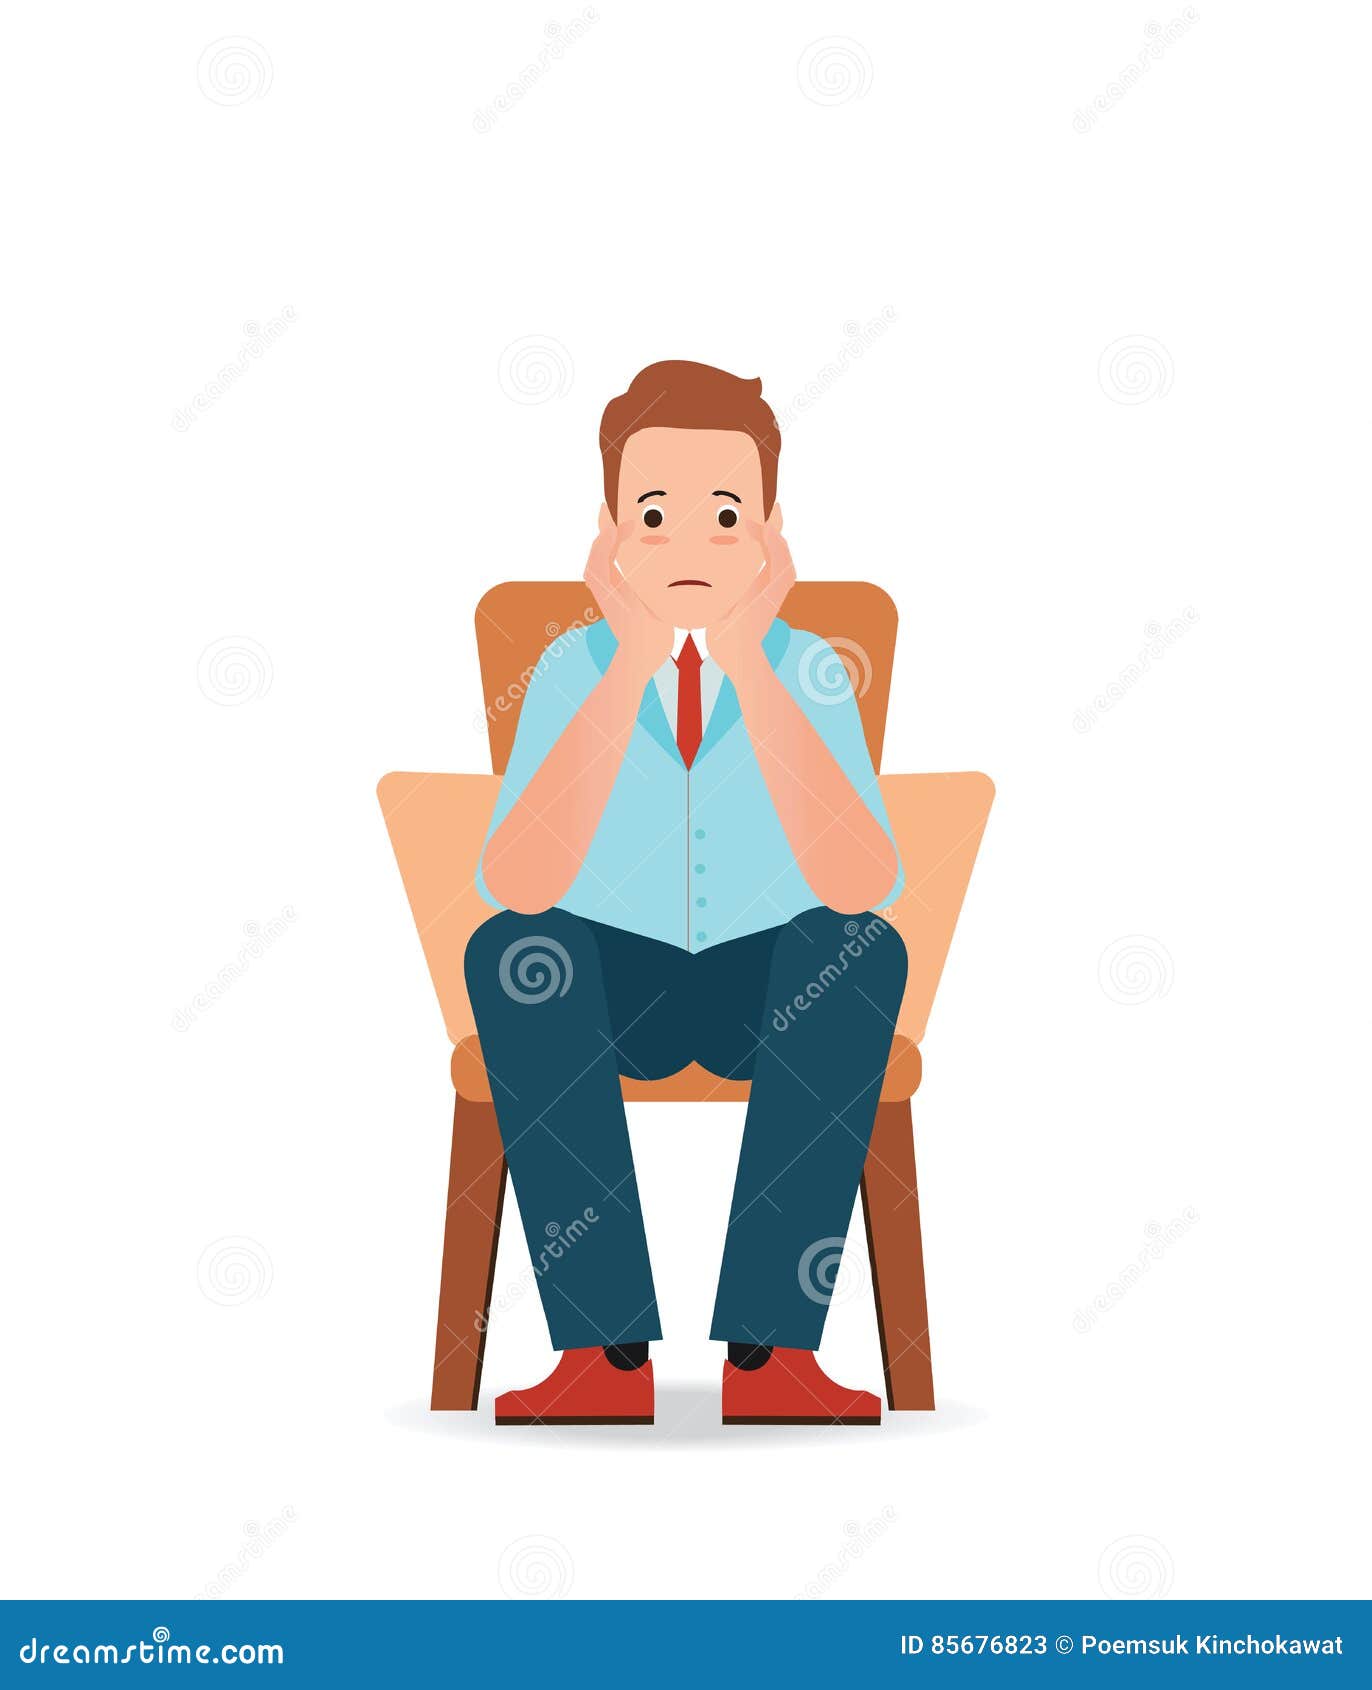 person sitting on a chair cartoon